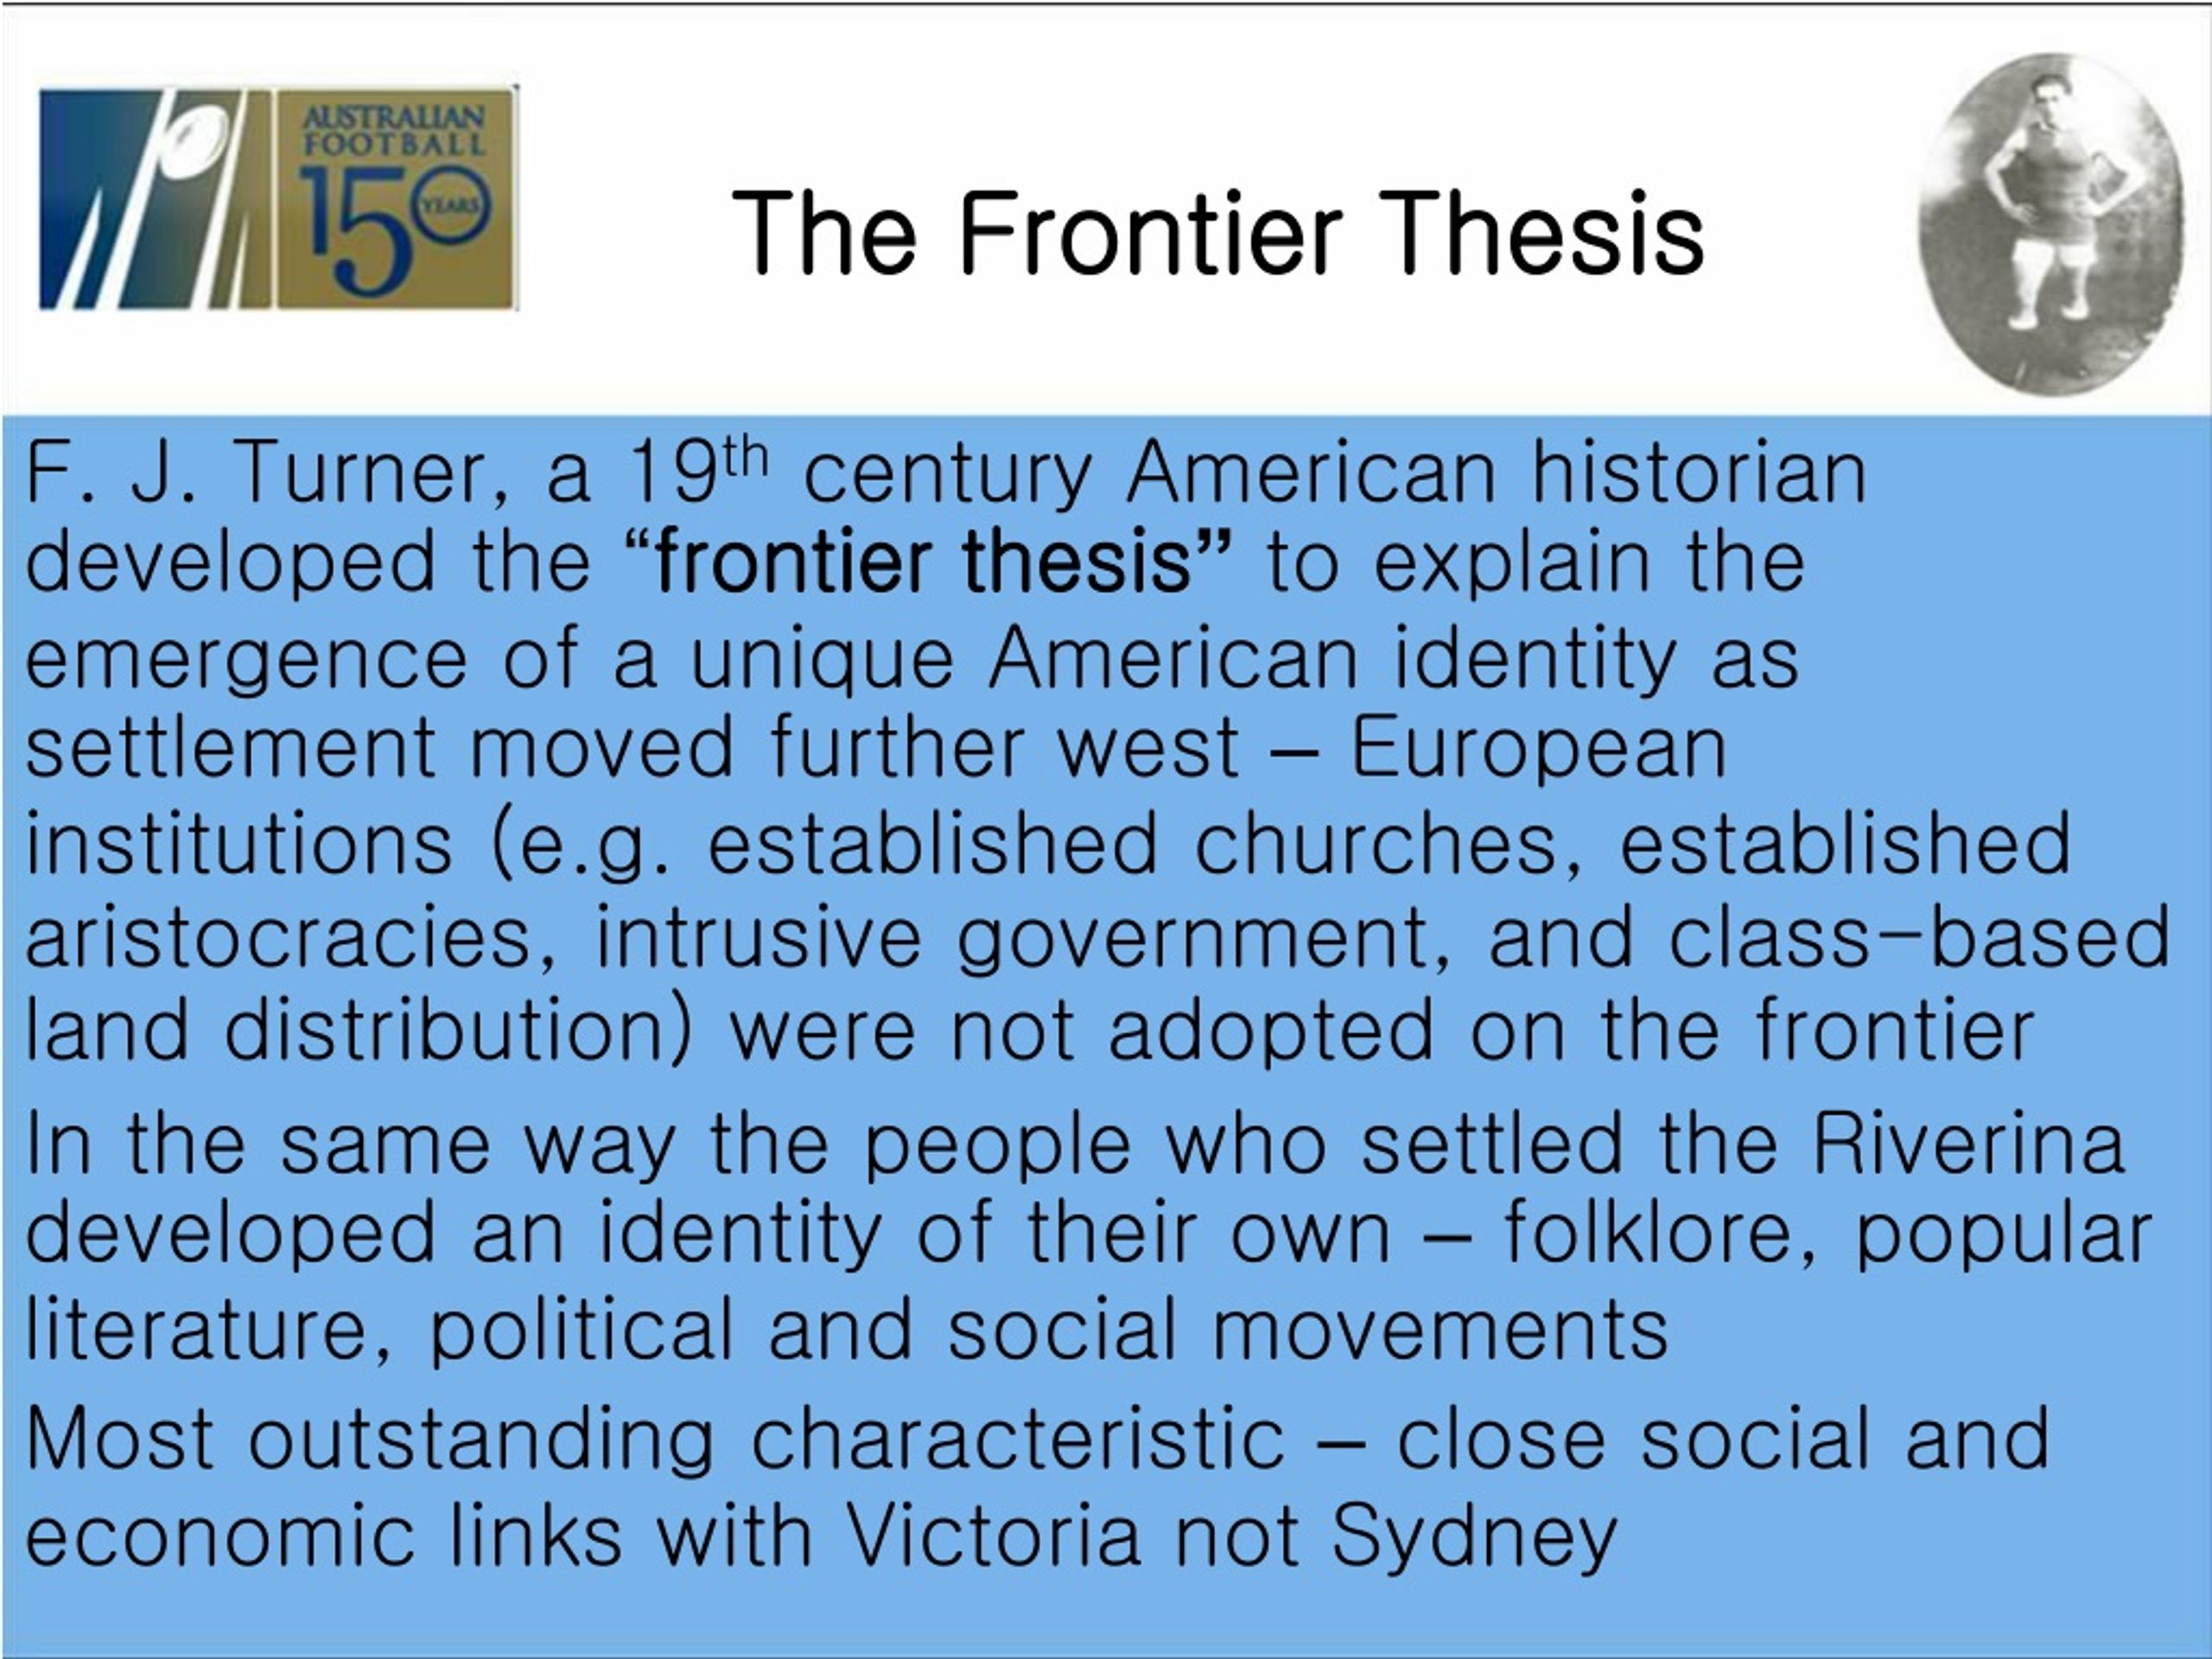 why was the frontier thesis important